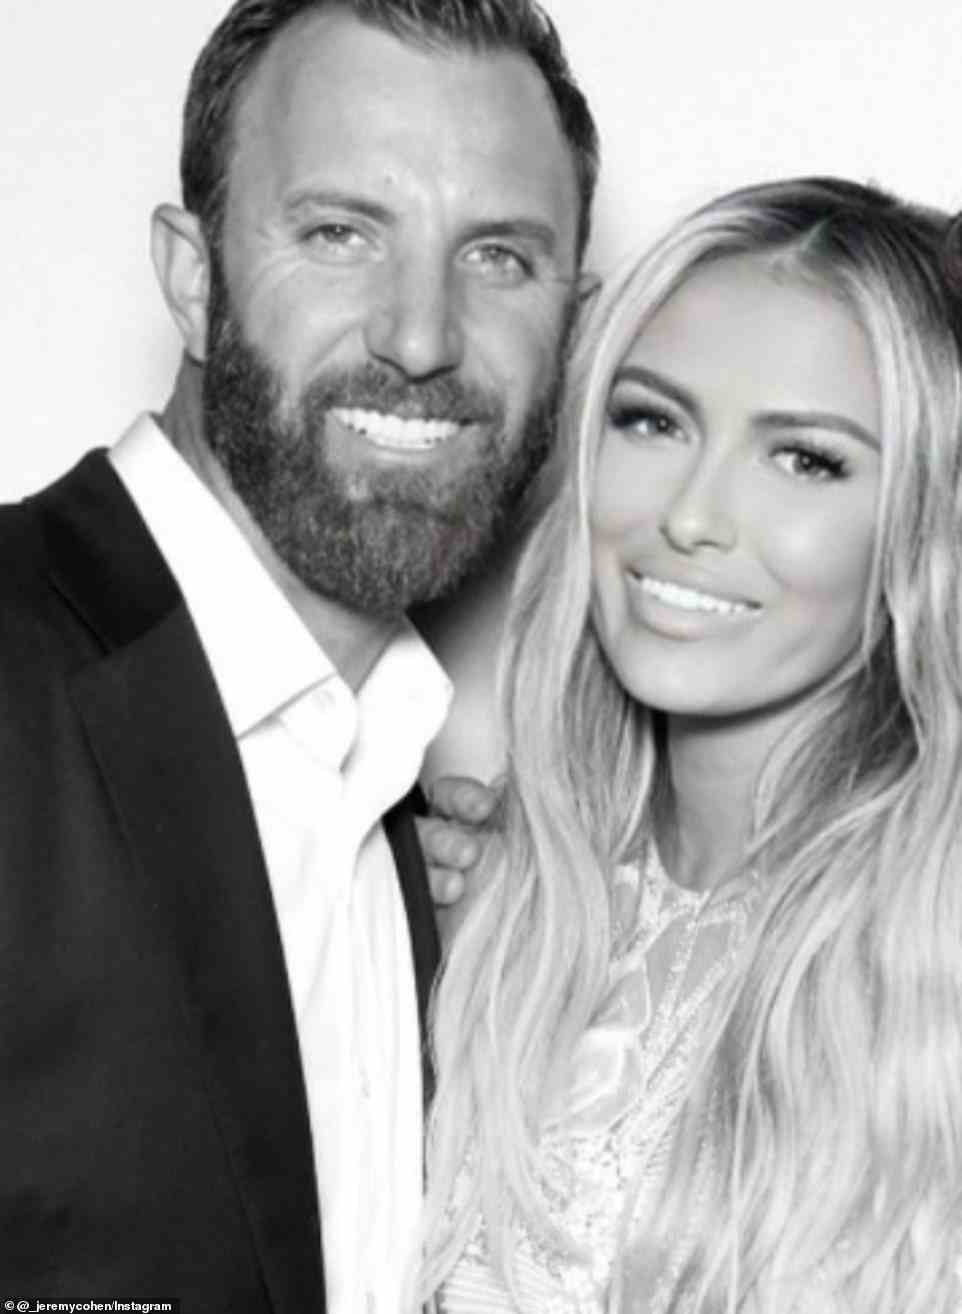 The happy couple! Paulina Gretzy and Dustin Johnson tied the knot in a lavish ceremony in Tennessee this weekend - and their guests have now shared a glimpse inside the celebration on social media